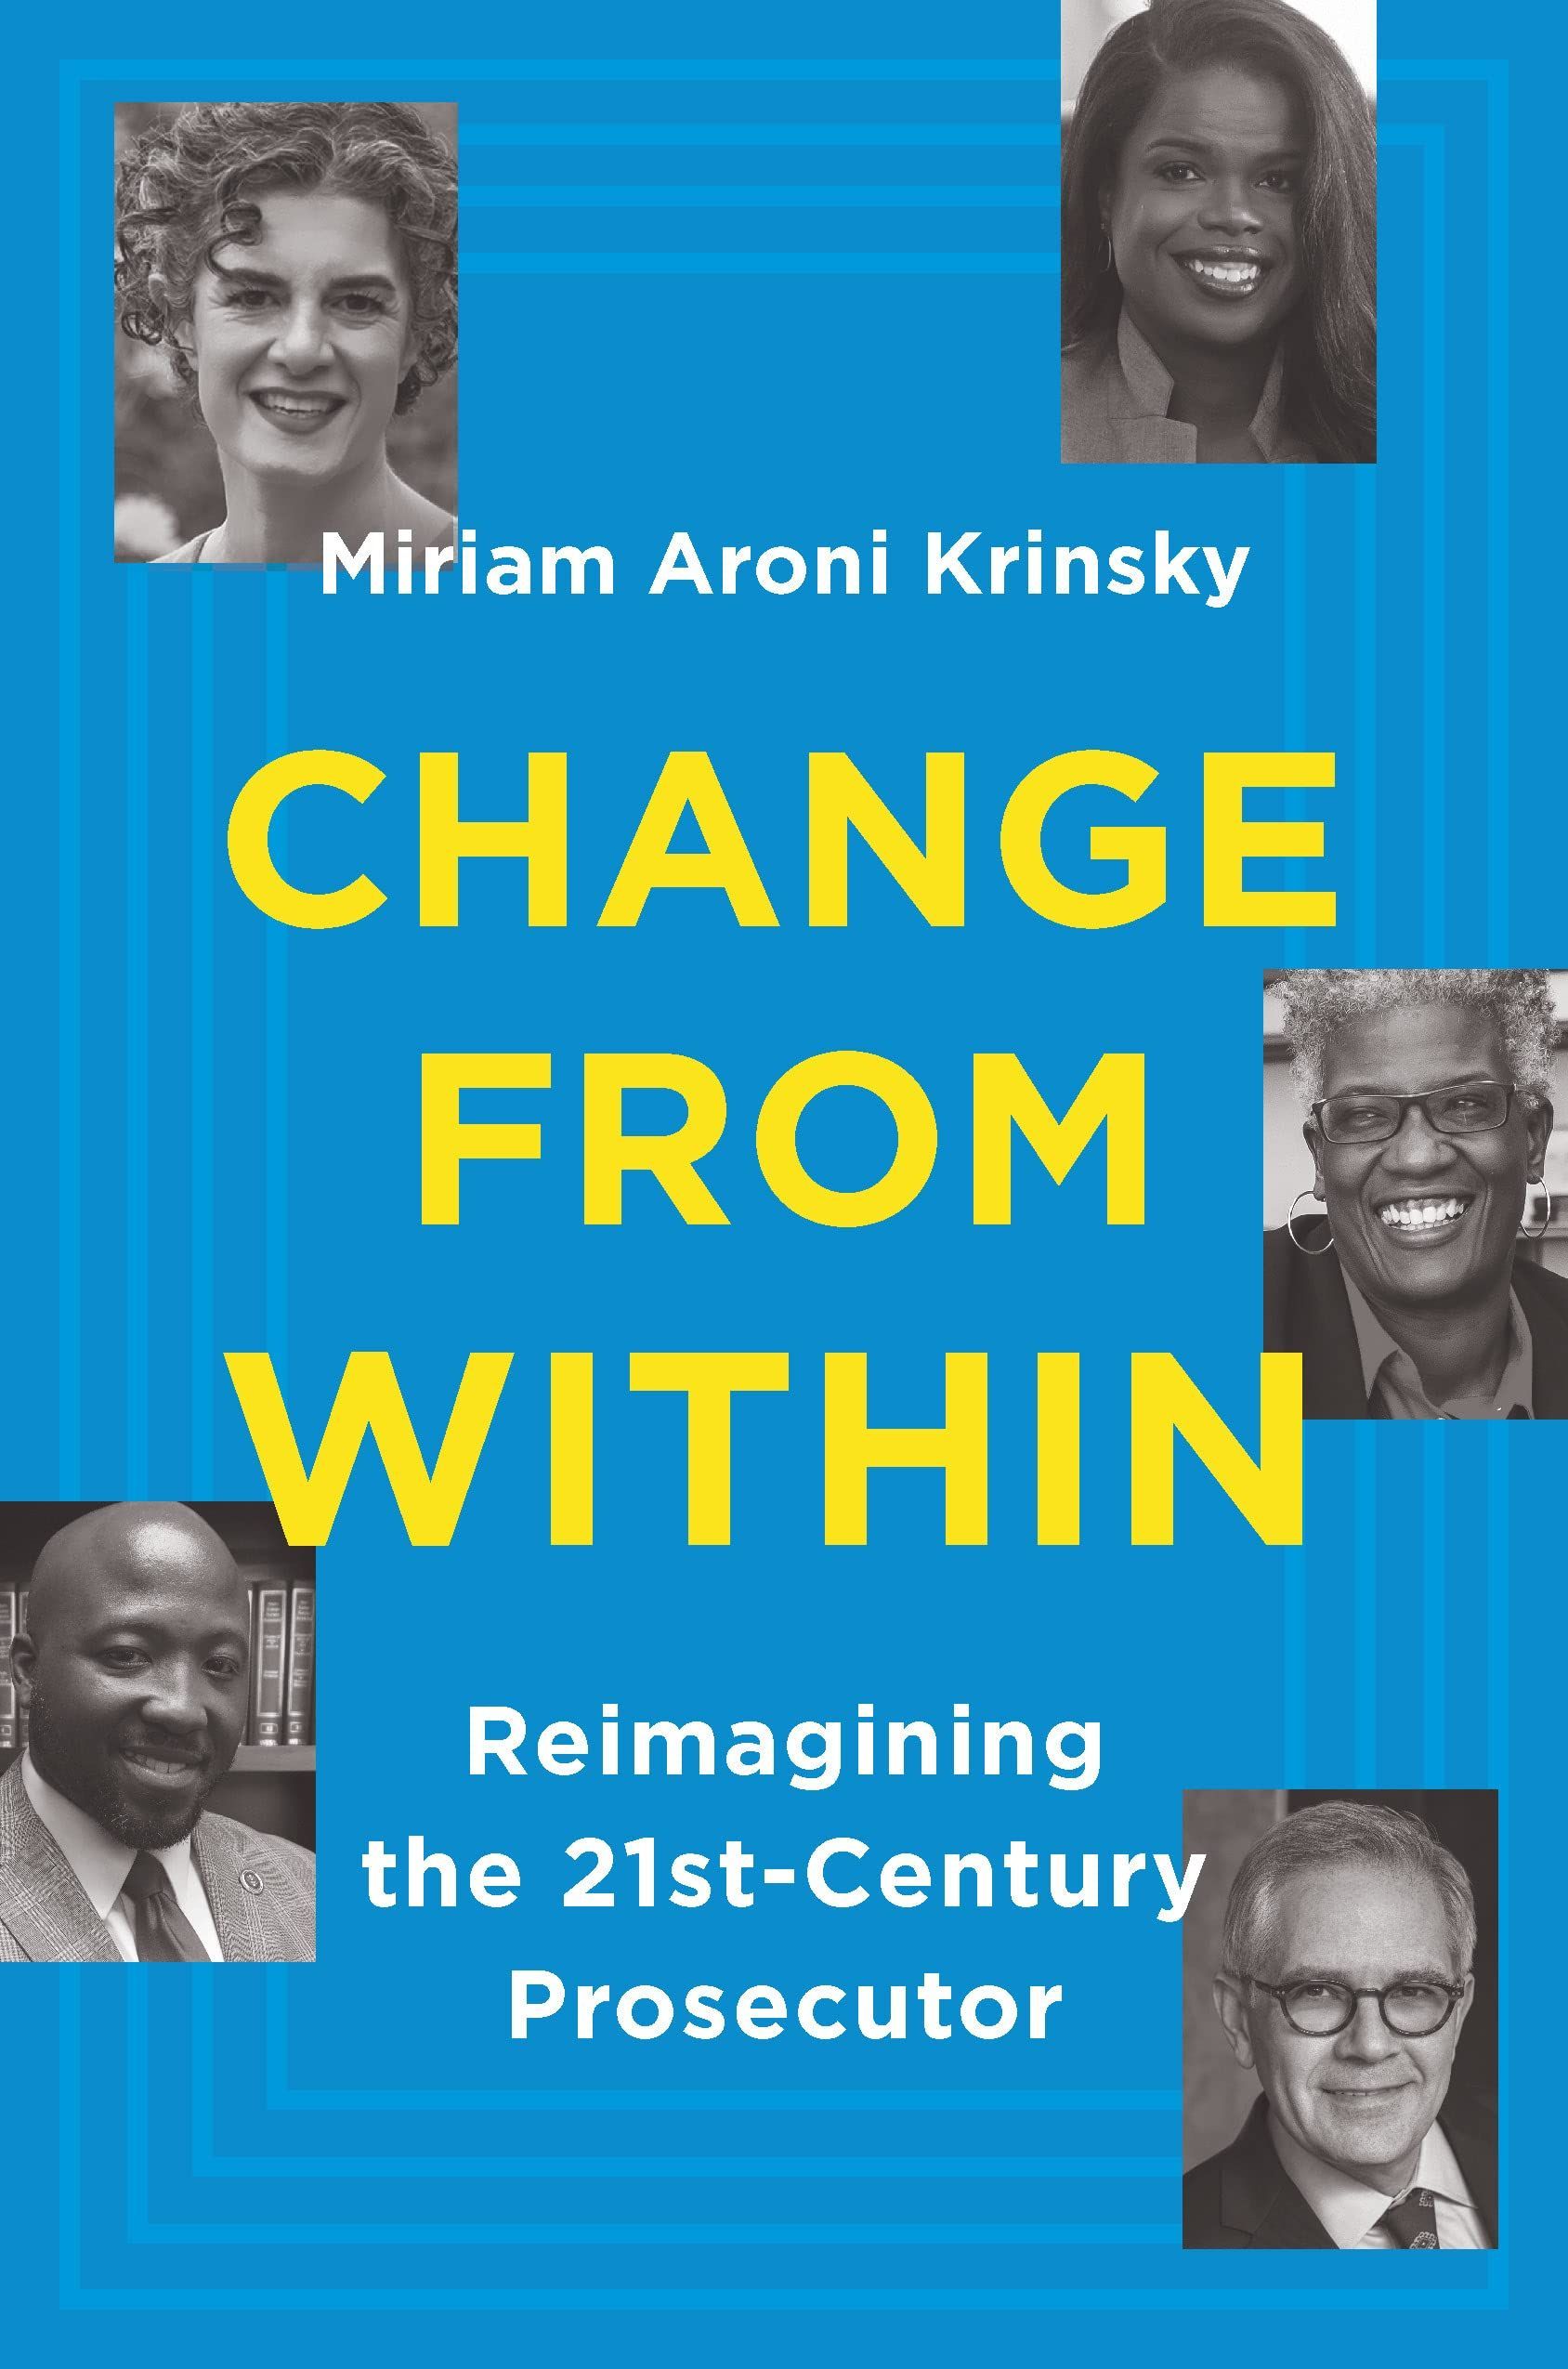 Change Is Hard: On Miriam Aroni Krinsky’s “Change from Within”